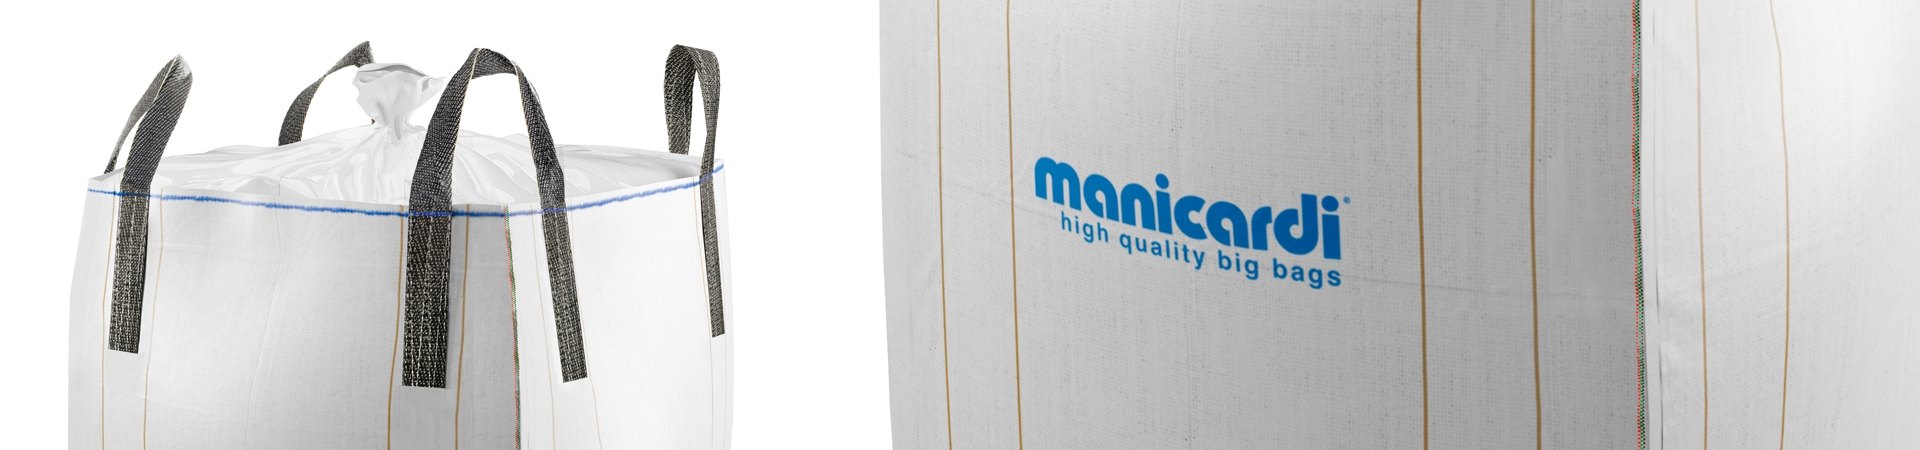 manicardi - hight quality big bags request a quote